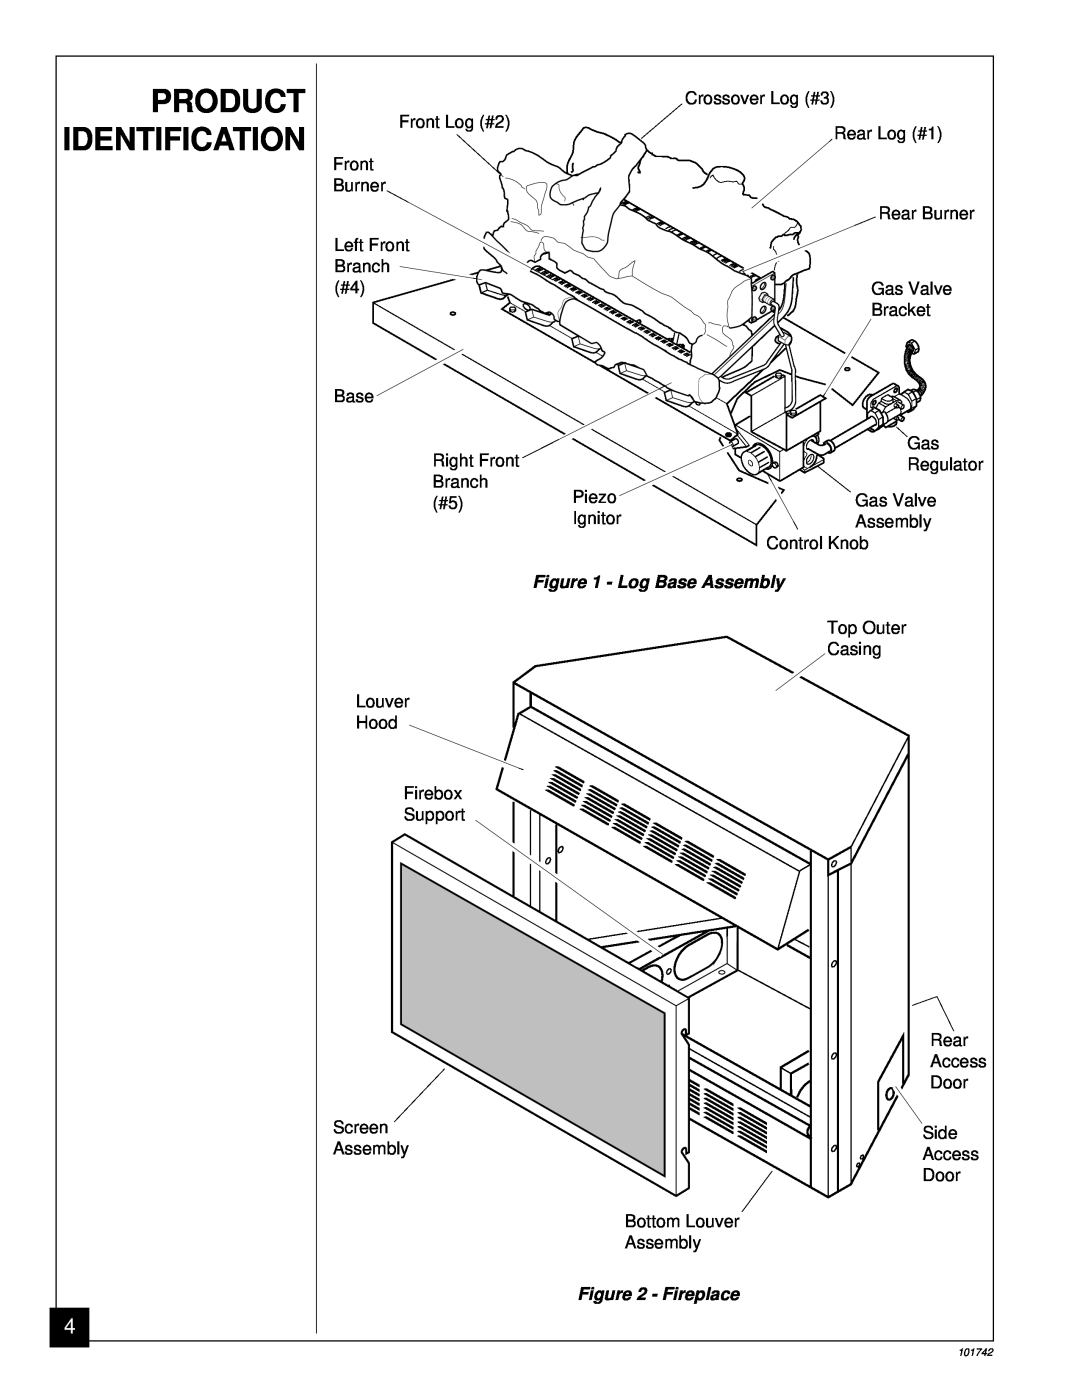 Desa UNVENTED (VENT-FREE) NATURAL GAS FIREPLACE installation manual Product Identification, Log Base Assembly, Fireplace 